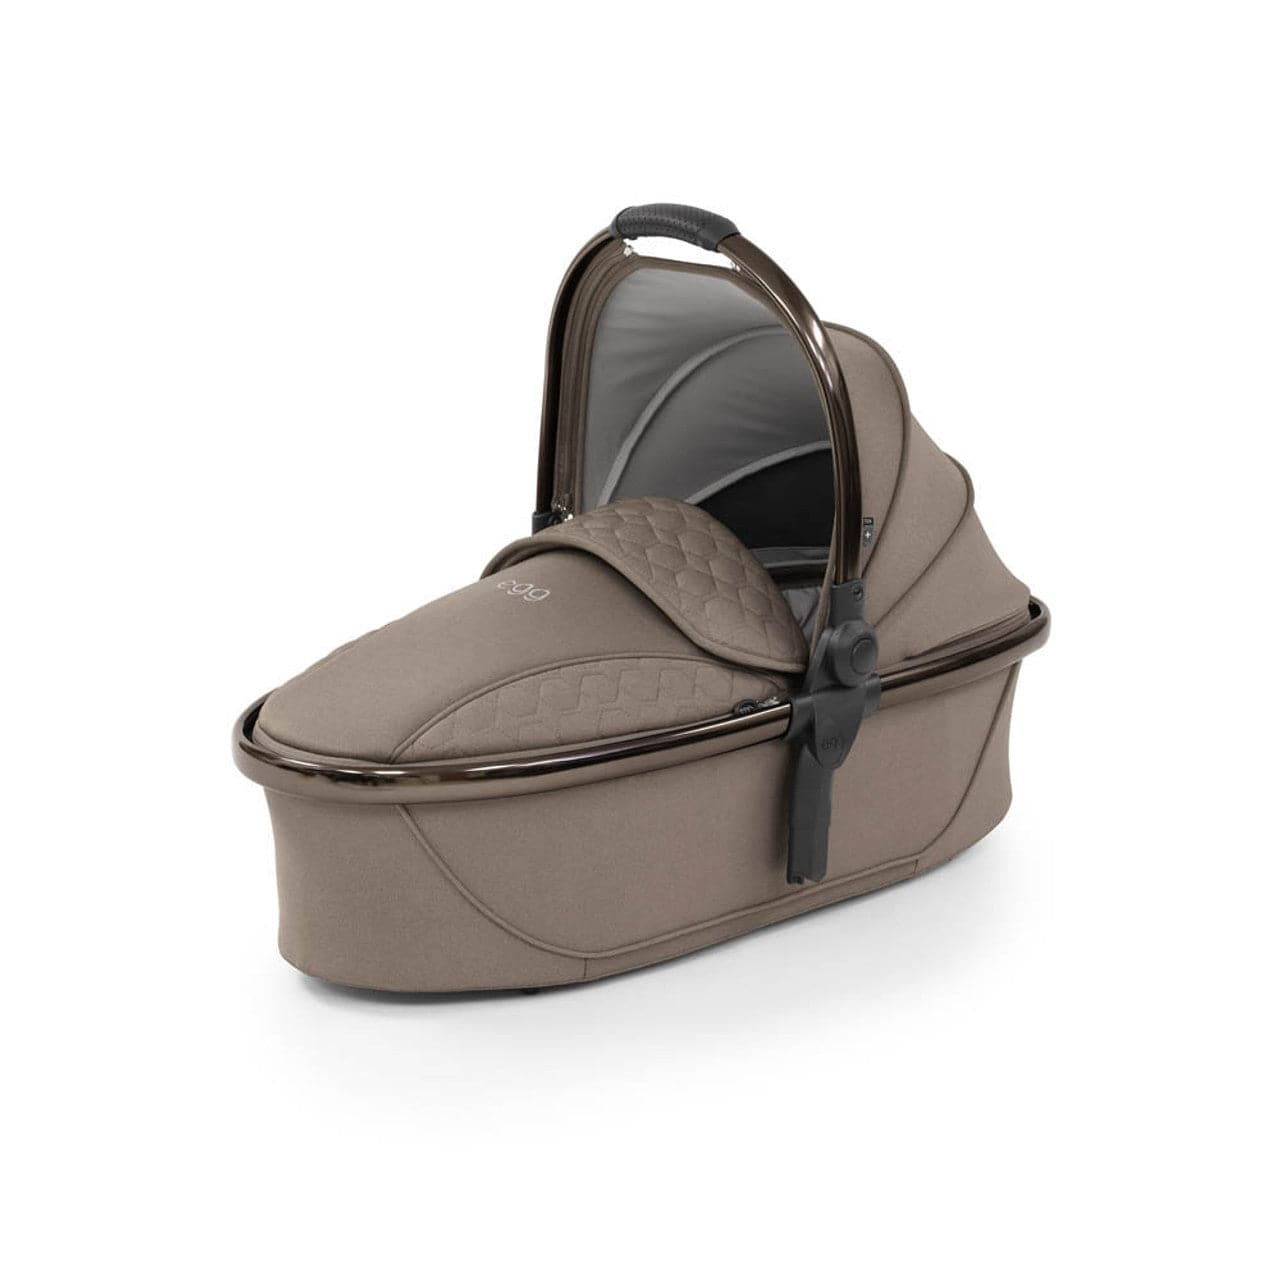 Egg® 2 Carrycot - Mink -  | For Your Little One